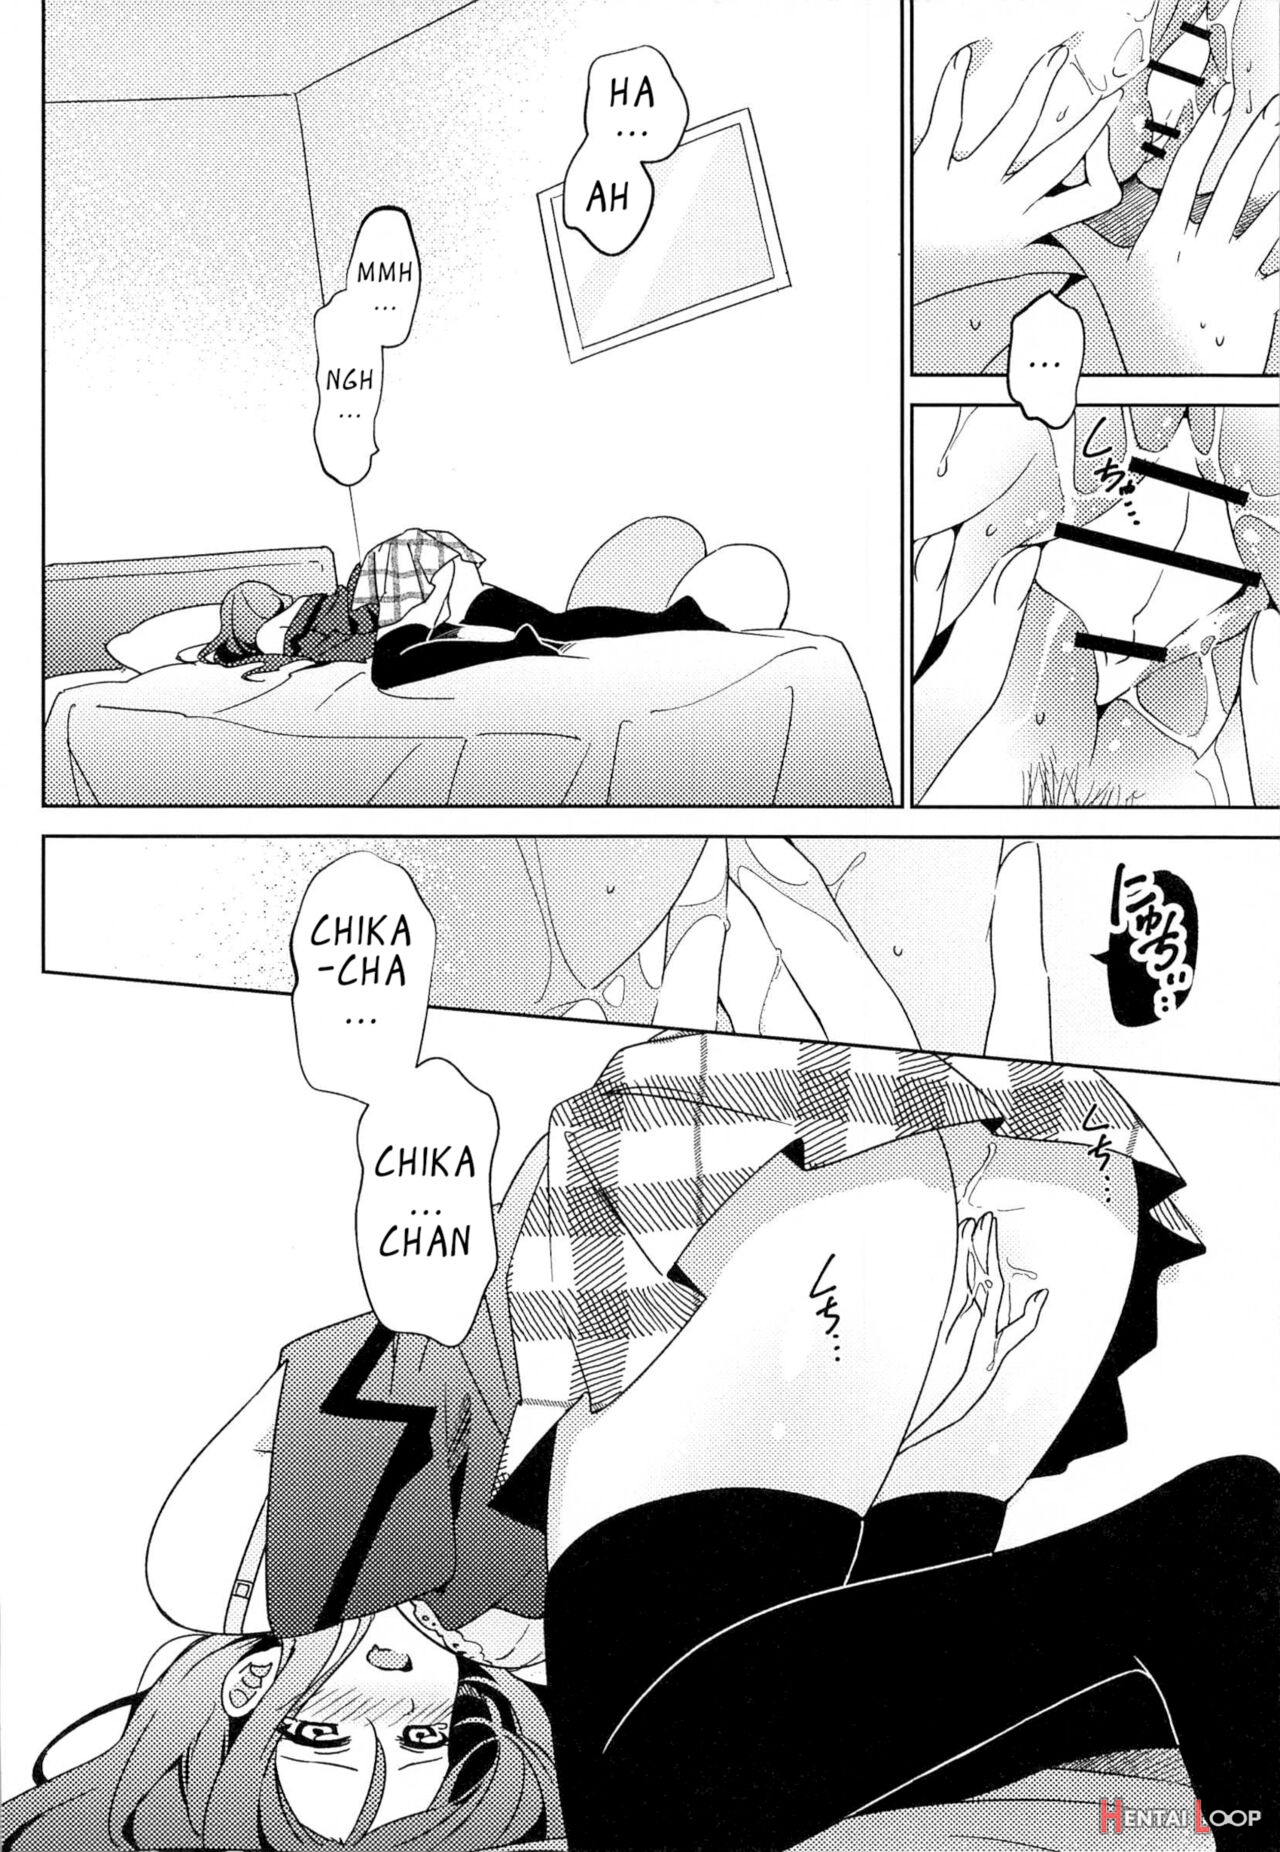 Chika-chan's ○○ Can't Fit page 3